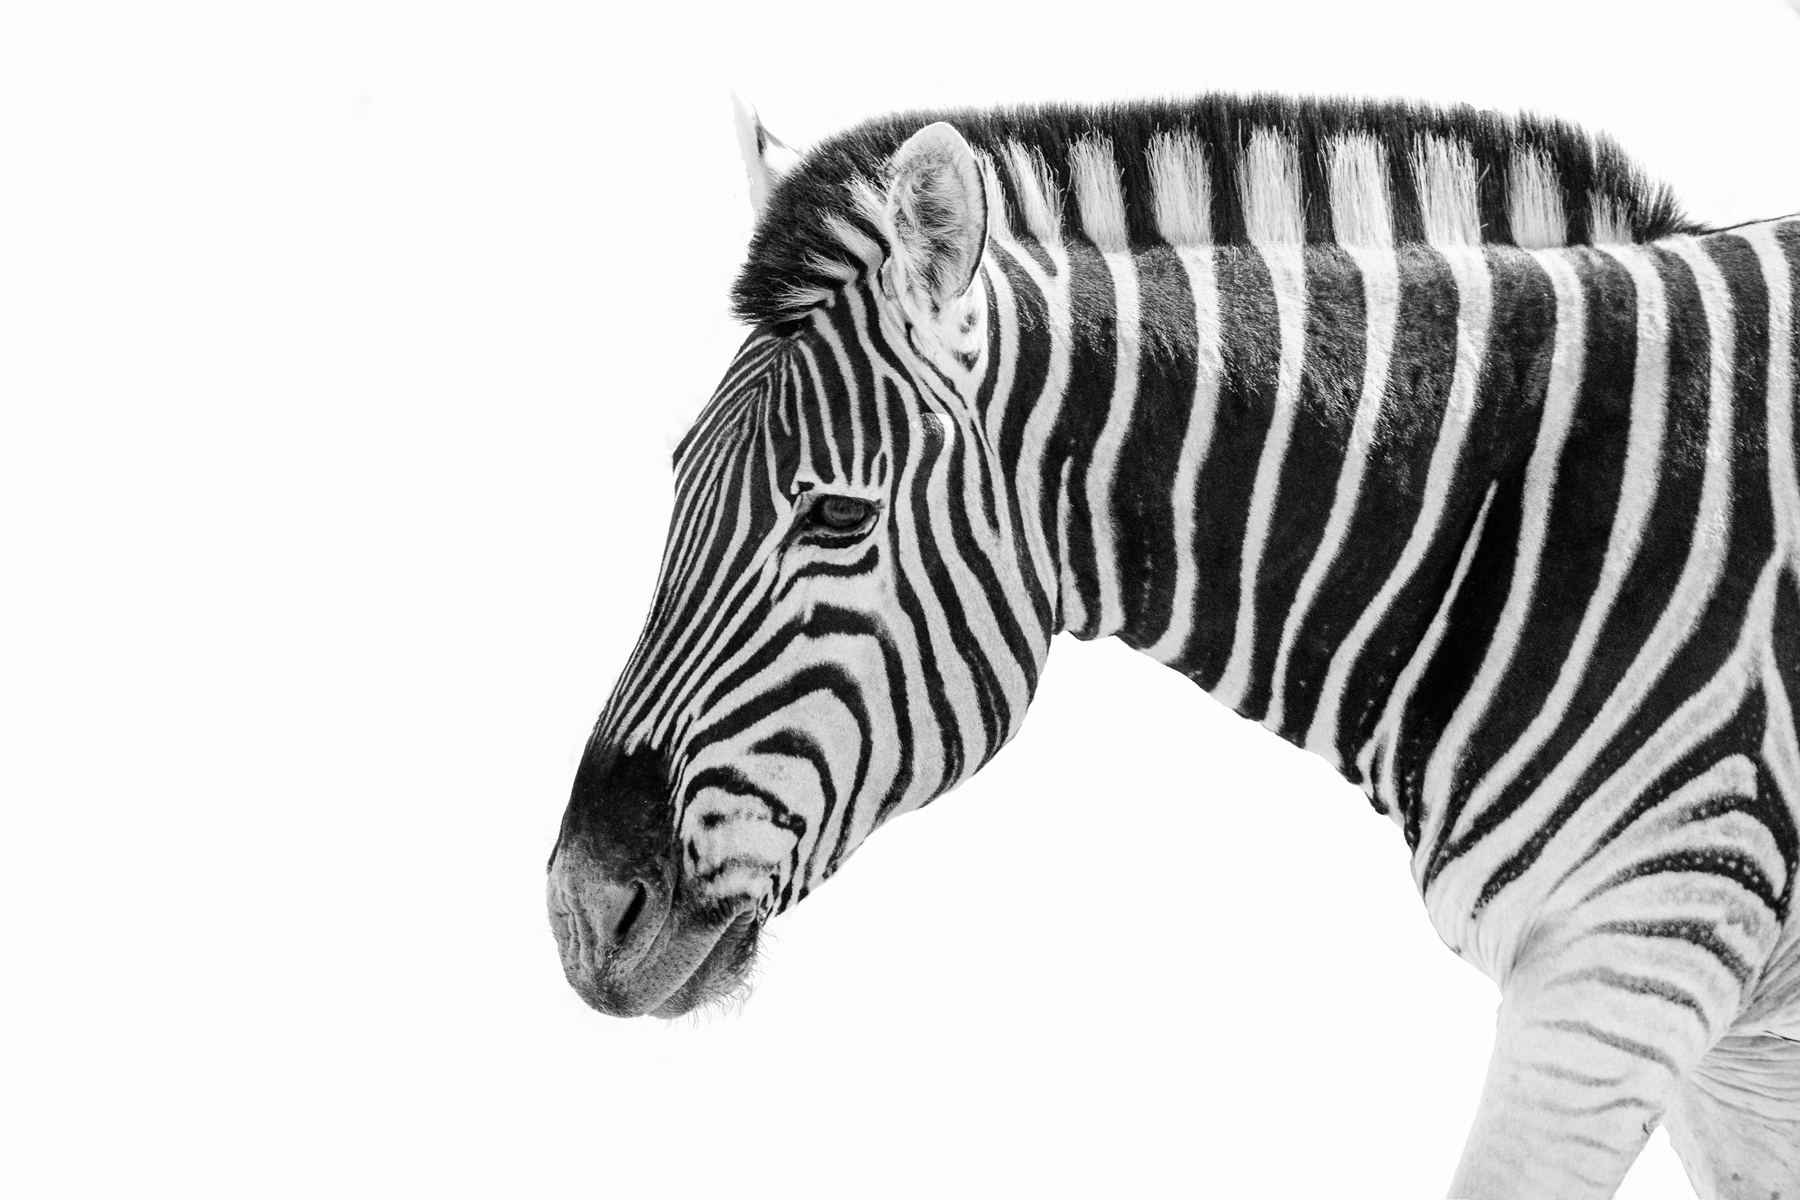 Zebra Portrait in black and white during our wildlife photography tour of Namibia